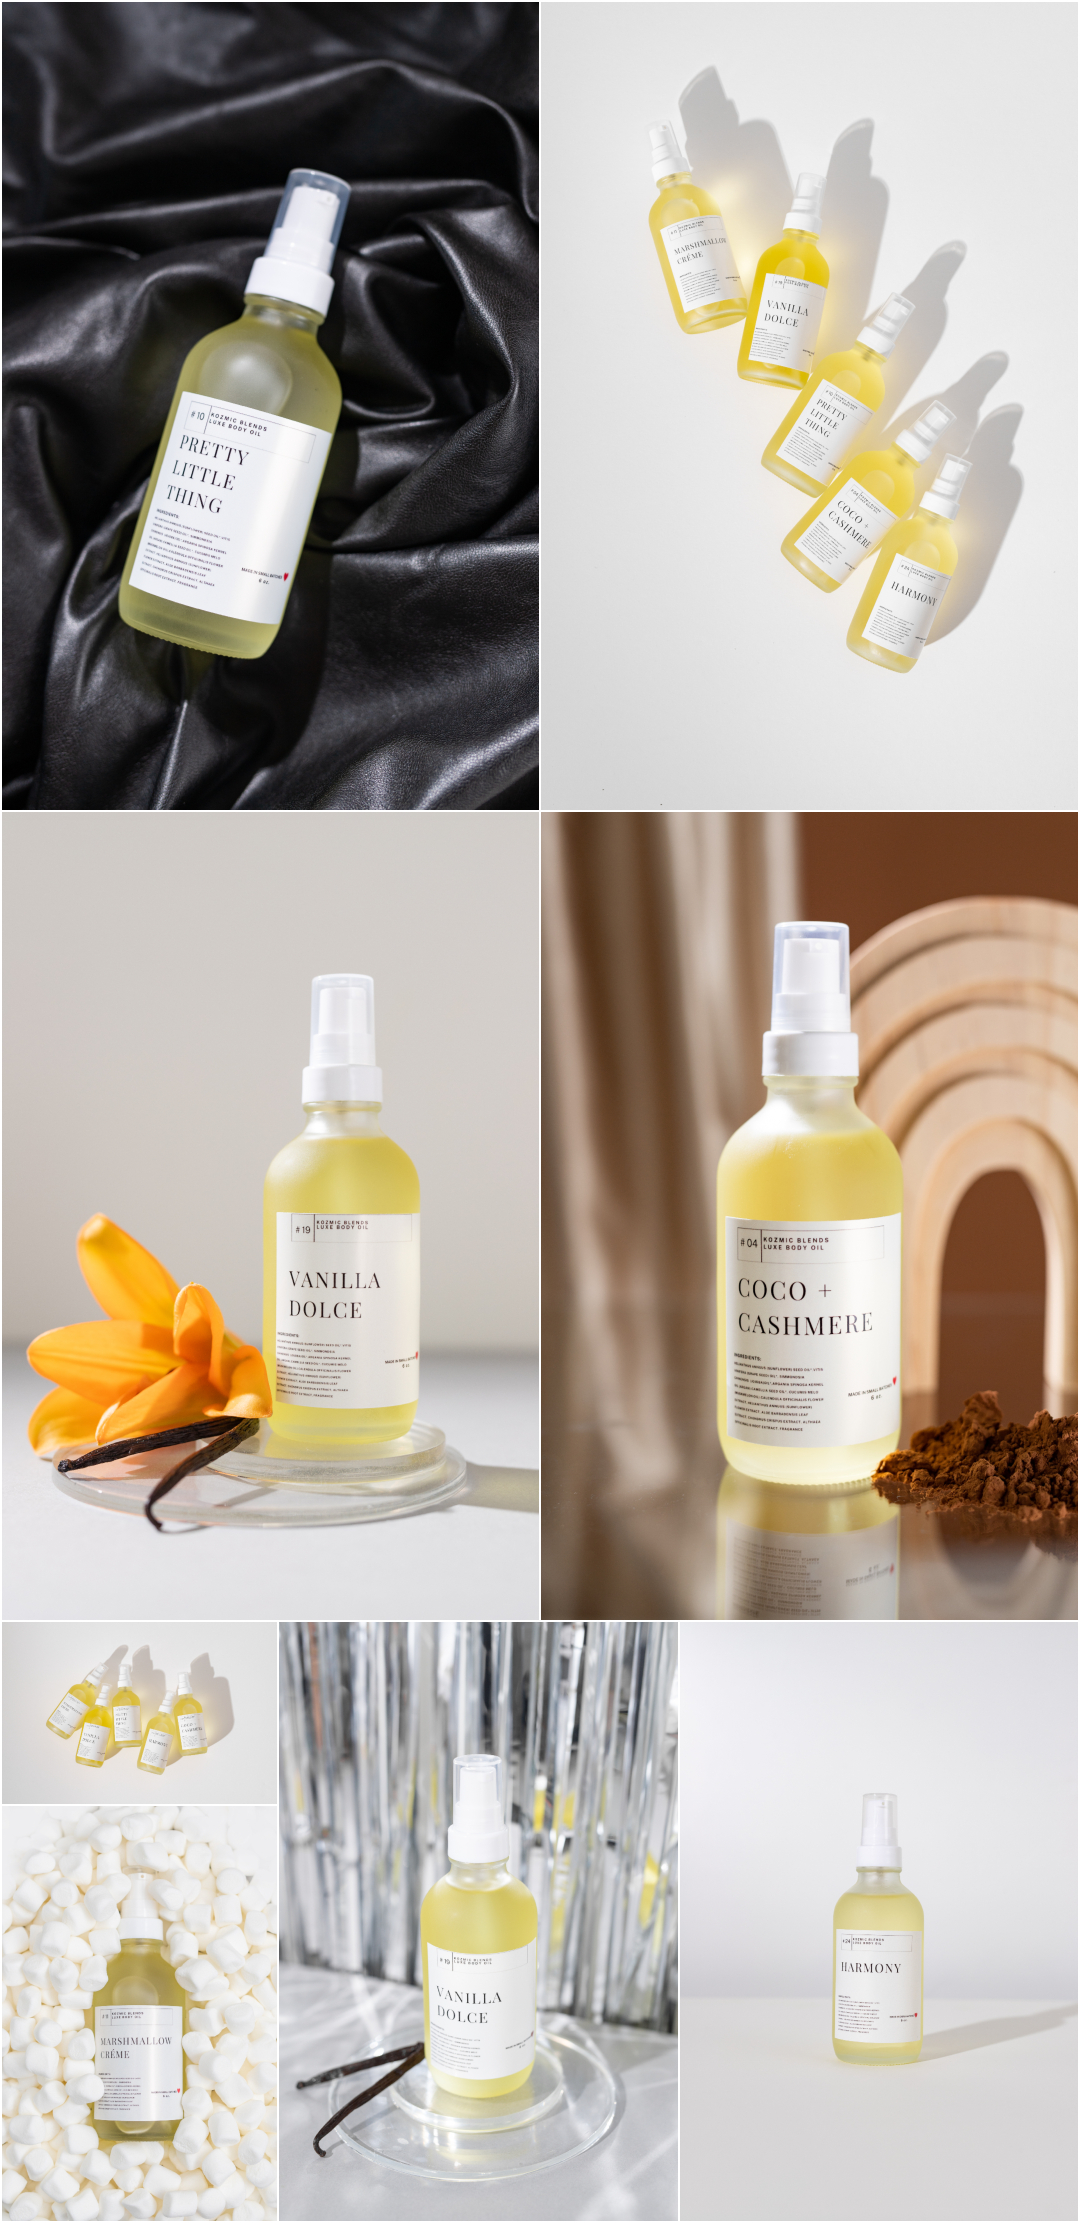 Body Oil Product Photographer - Beauty Product Photography